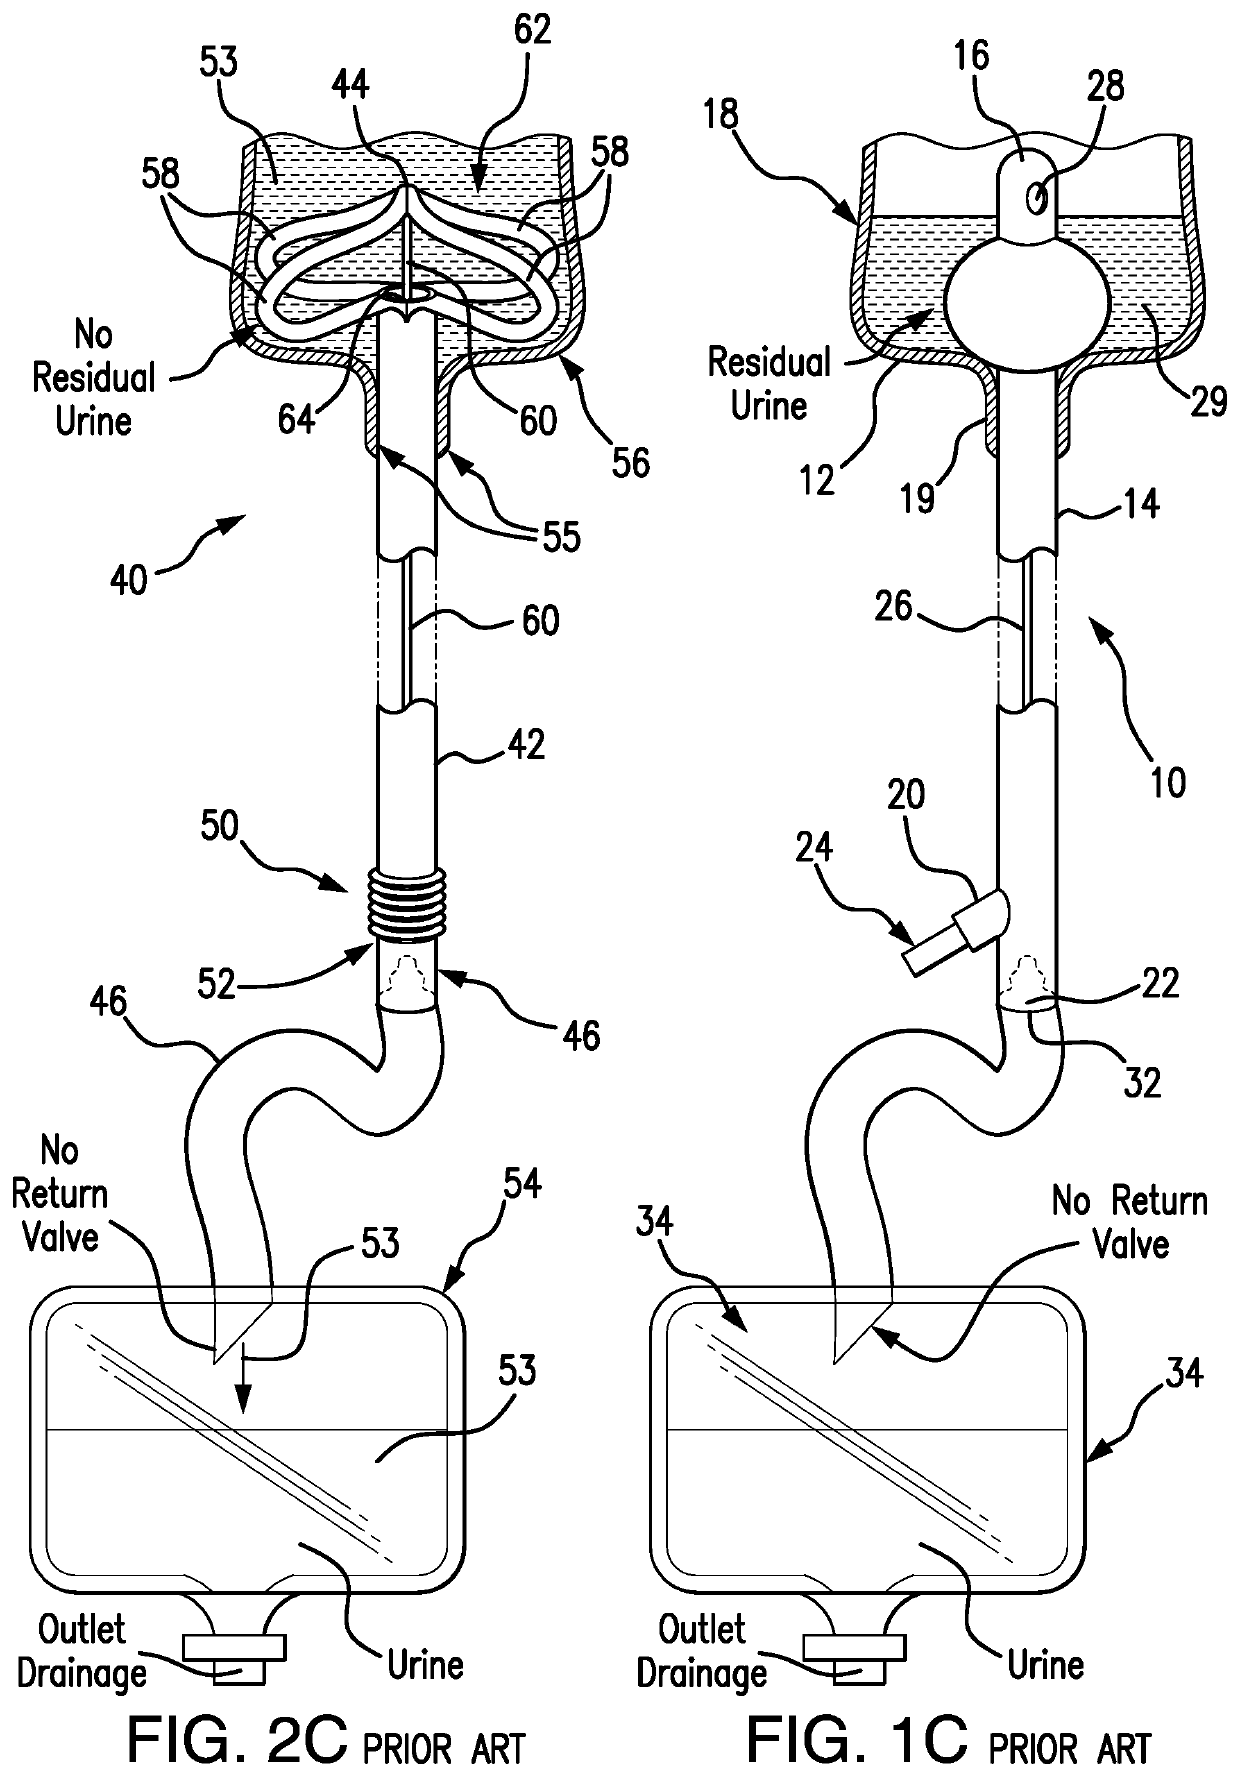 Urinary catheter system with improved retaining structure and enhanced urinary drainage